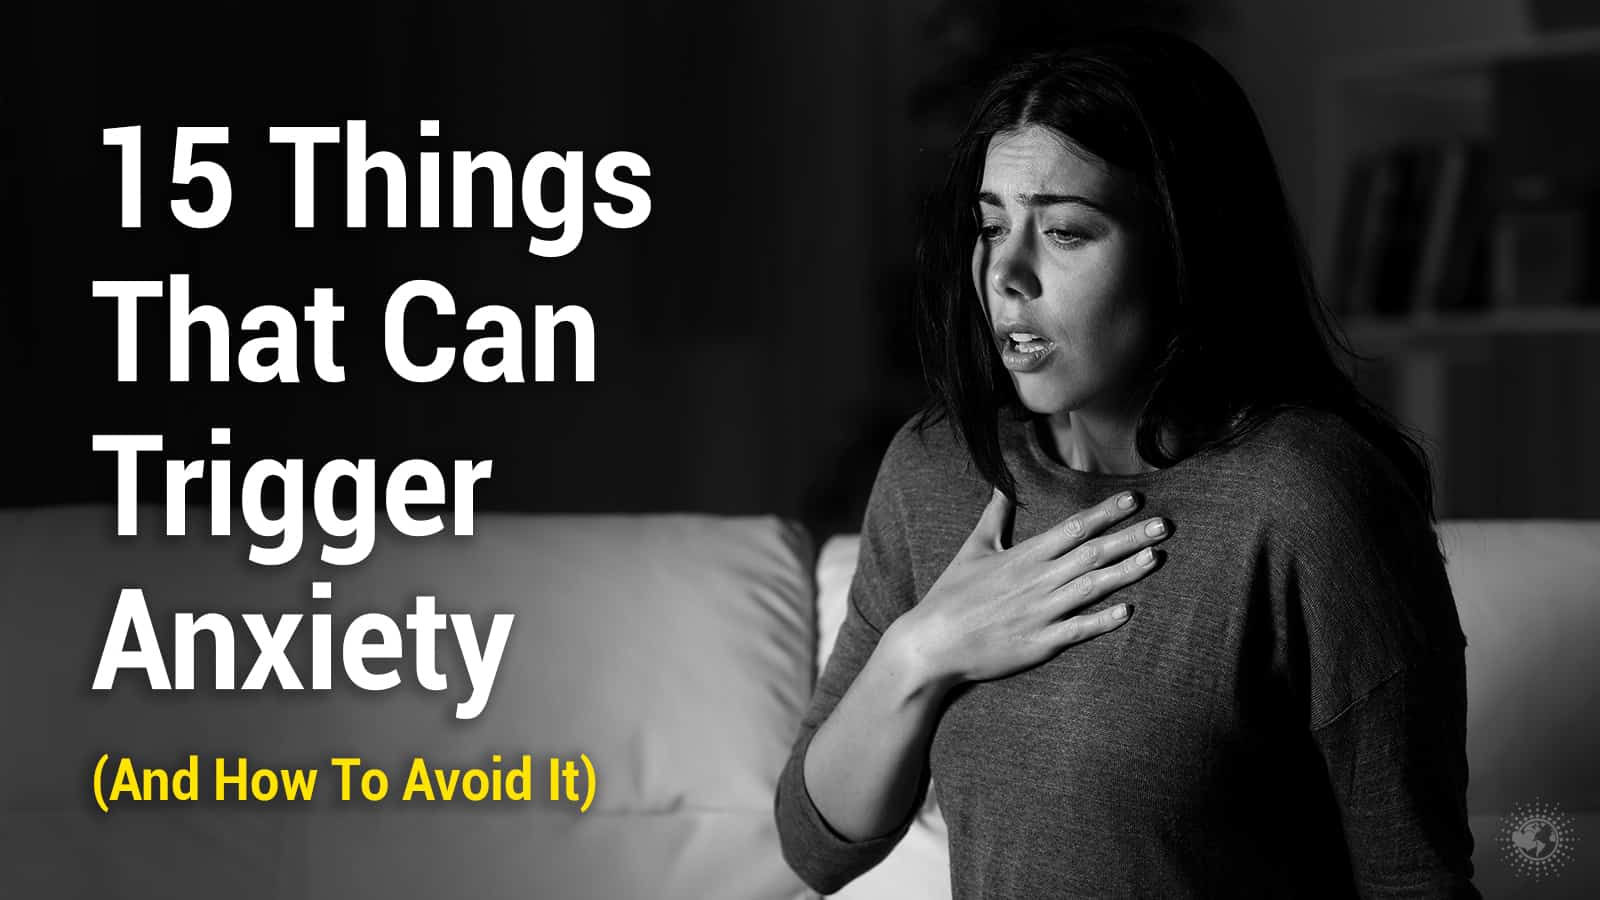 15 Things That Can Trigger Anxiety (And How To Avoid It)